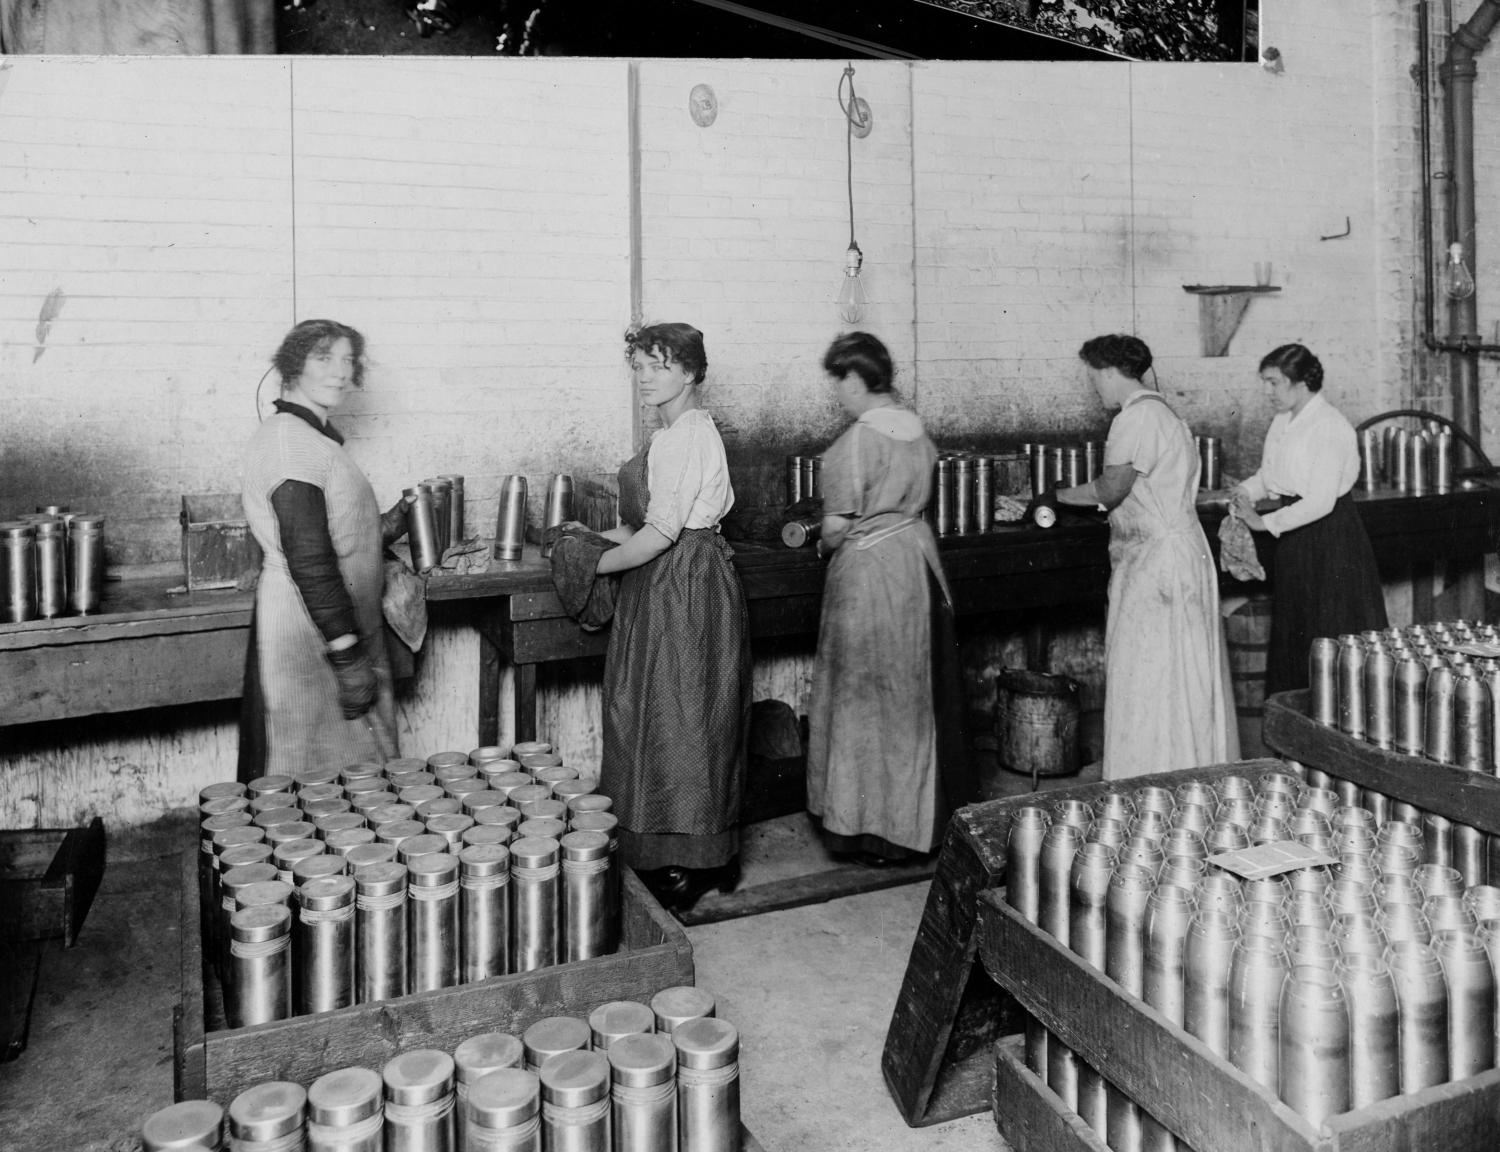 Women packing munitions in a factory with their backs turned.